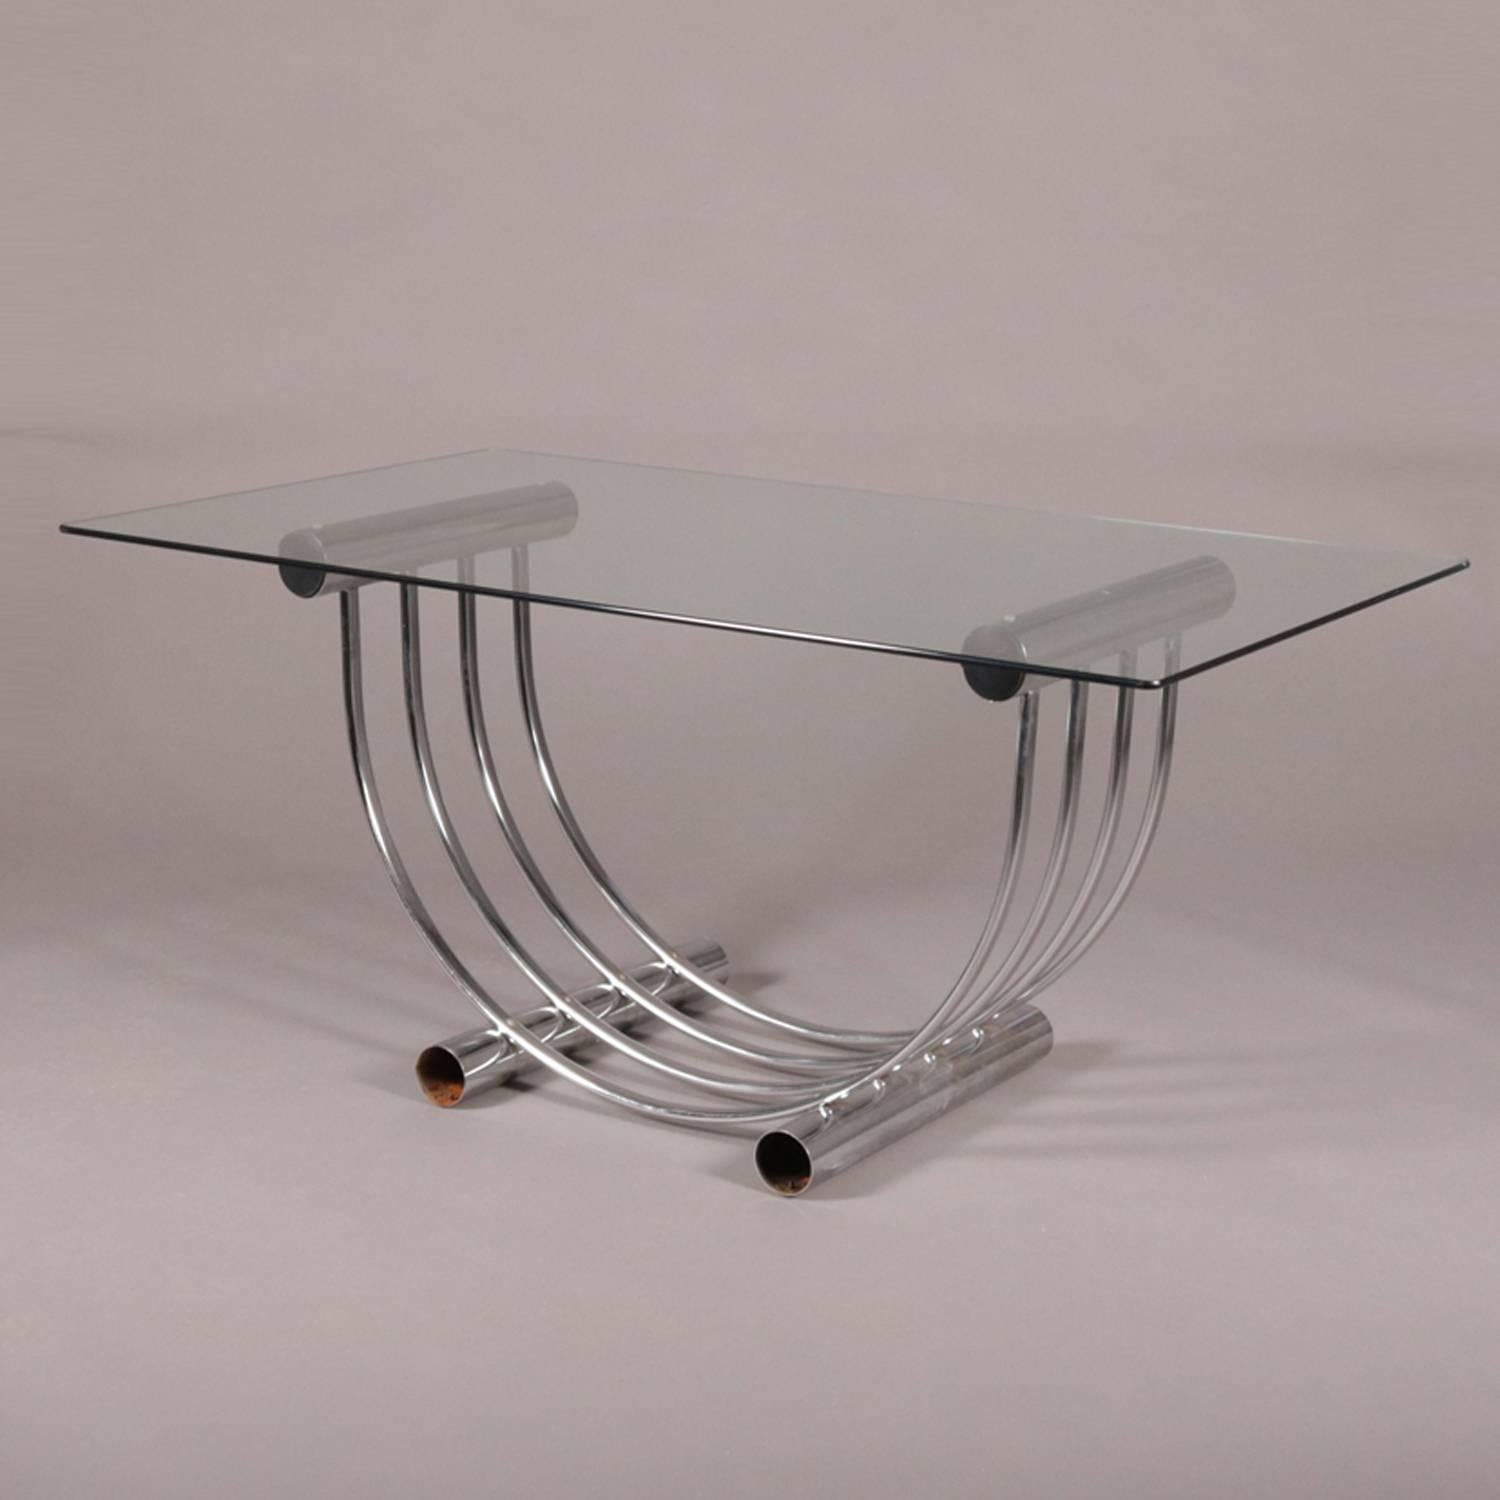 Mid-Century Modern Italian Bertoia school dining set features industrial tubular chrome dining chairs and U-form glass top table, 20th century

Measures: Table 28